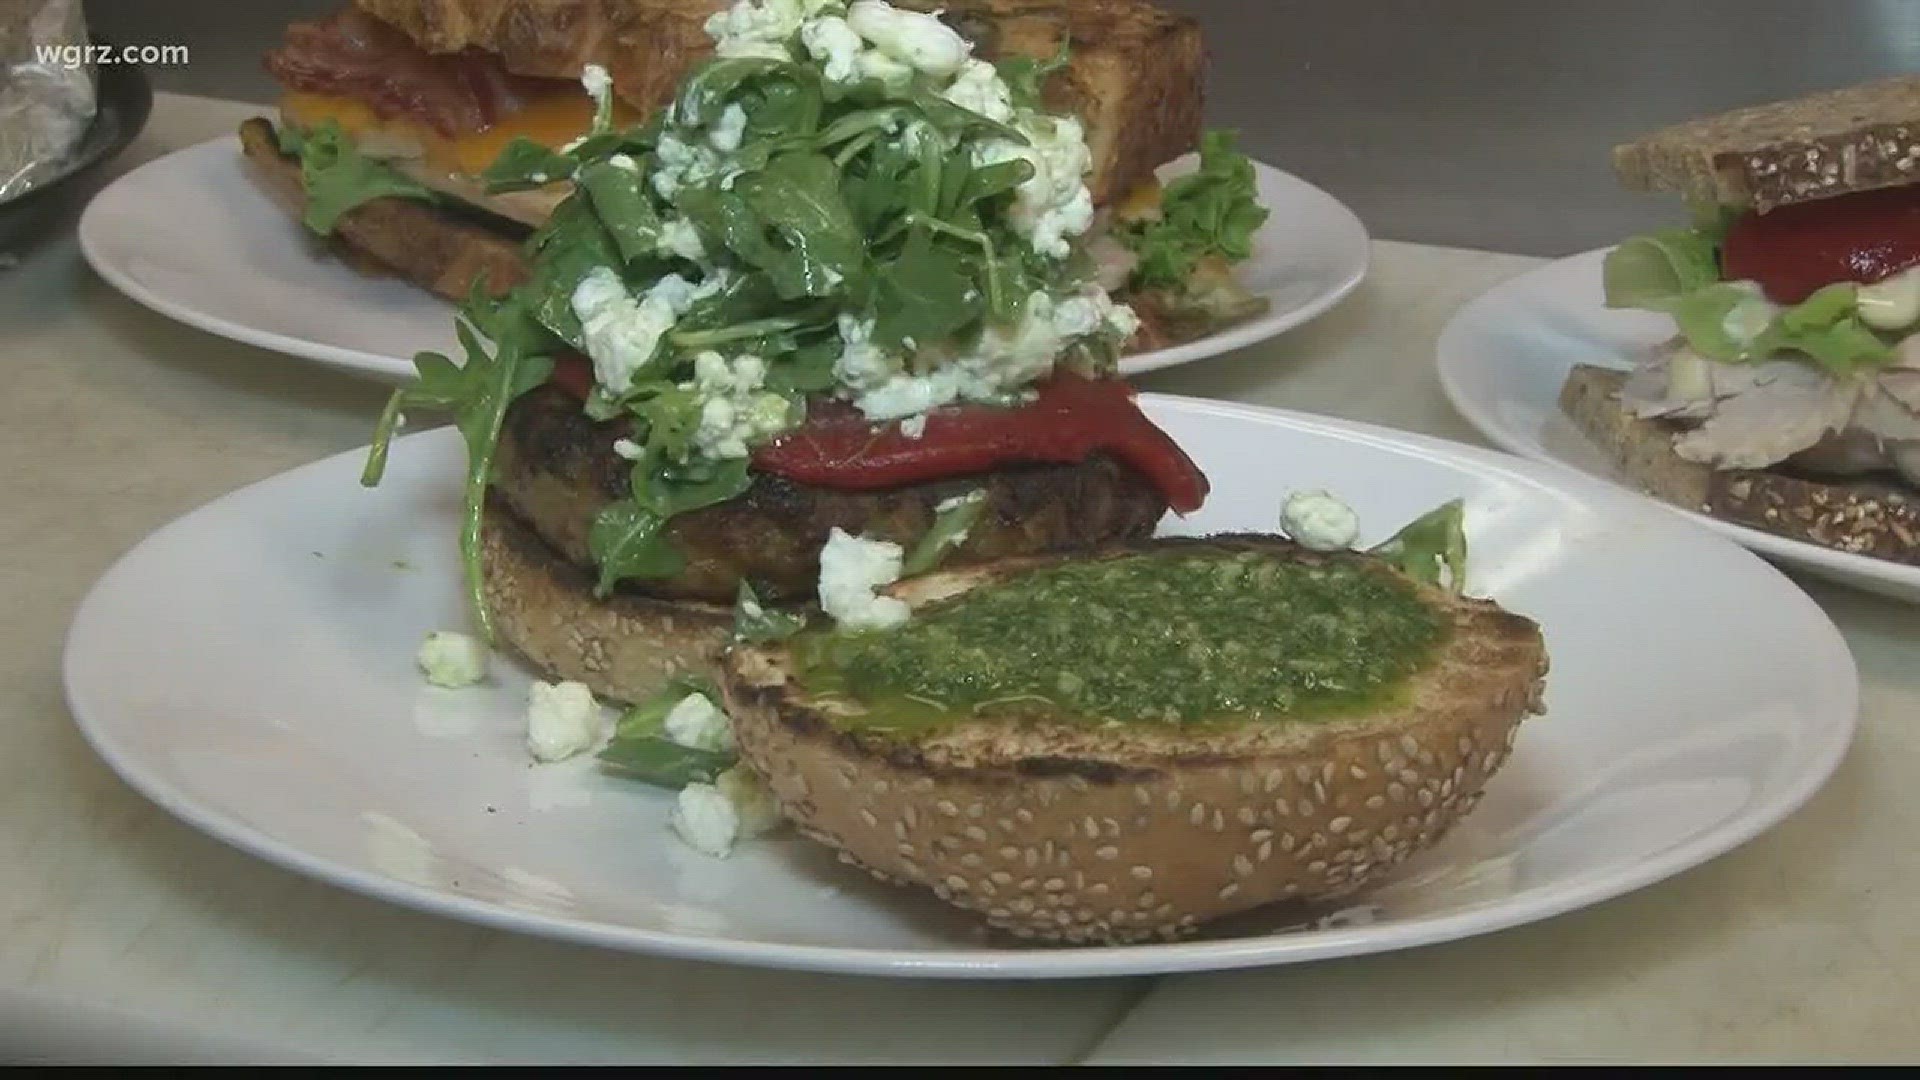 Today is national sandwich day and it's also the day we feature a restaurant around Western New York in our series "unique eats".